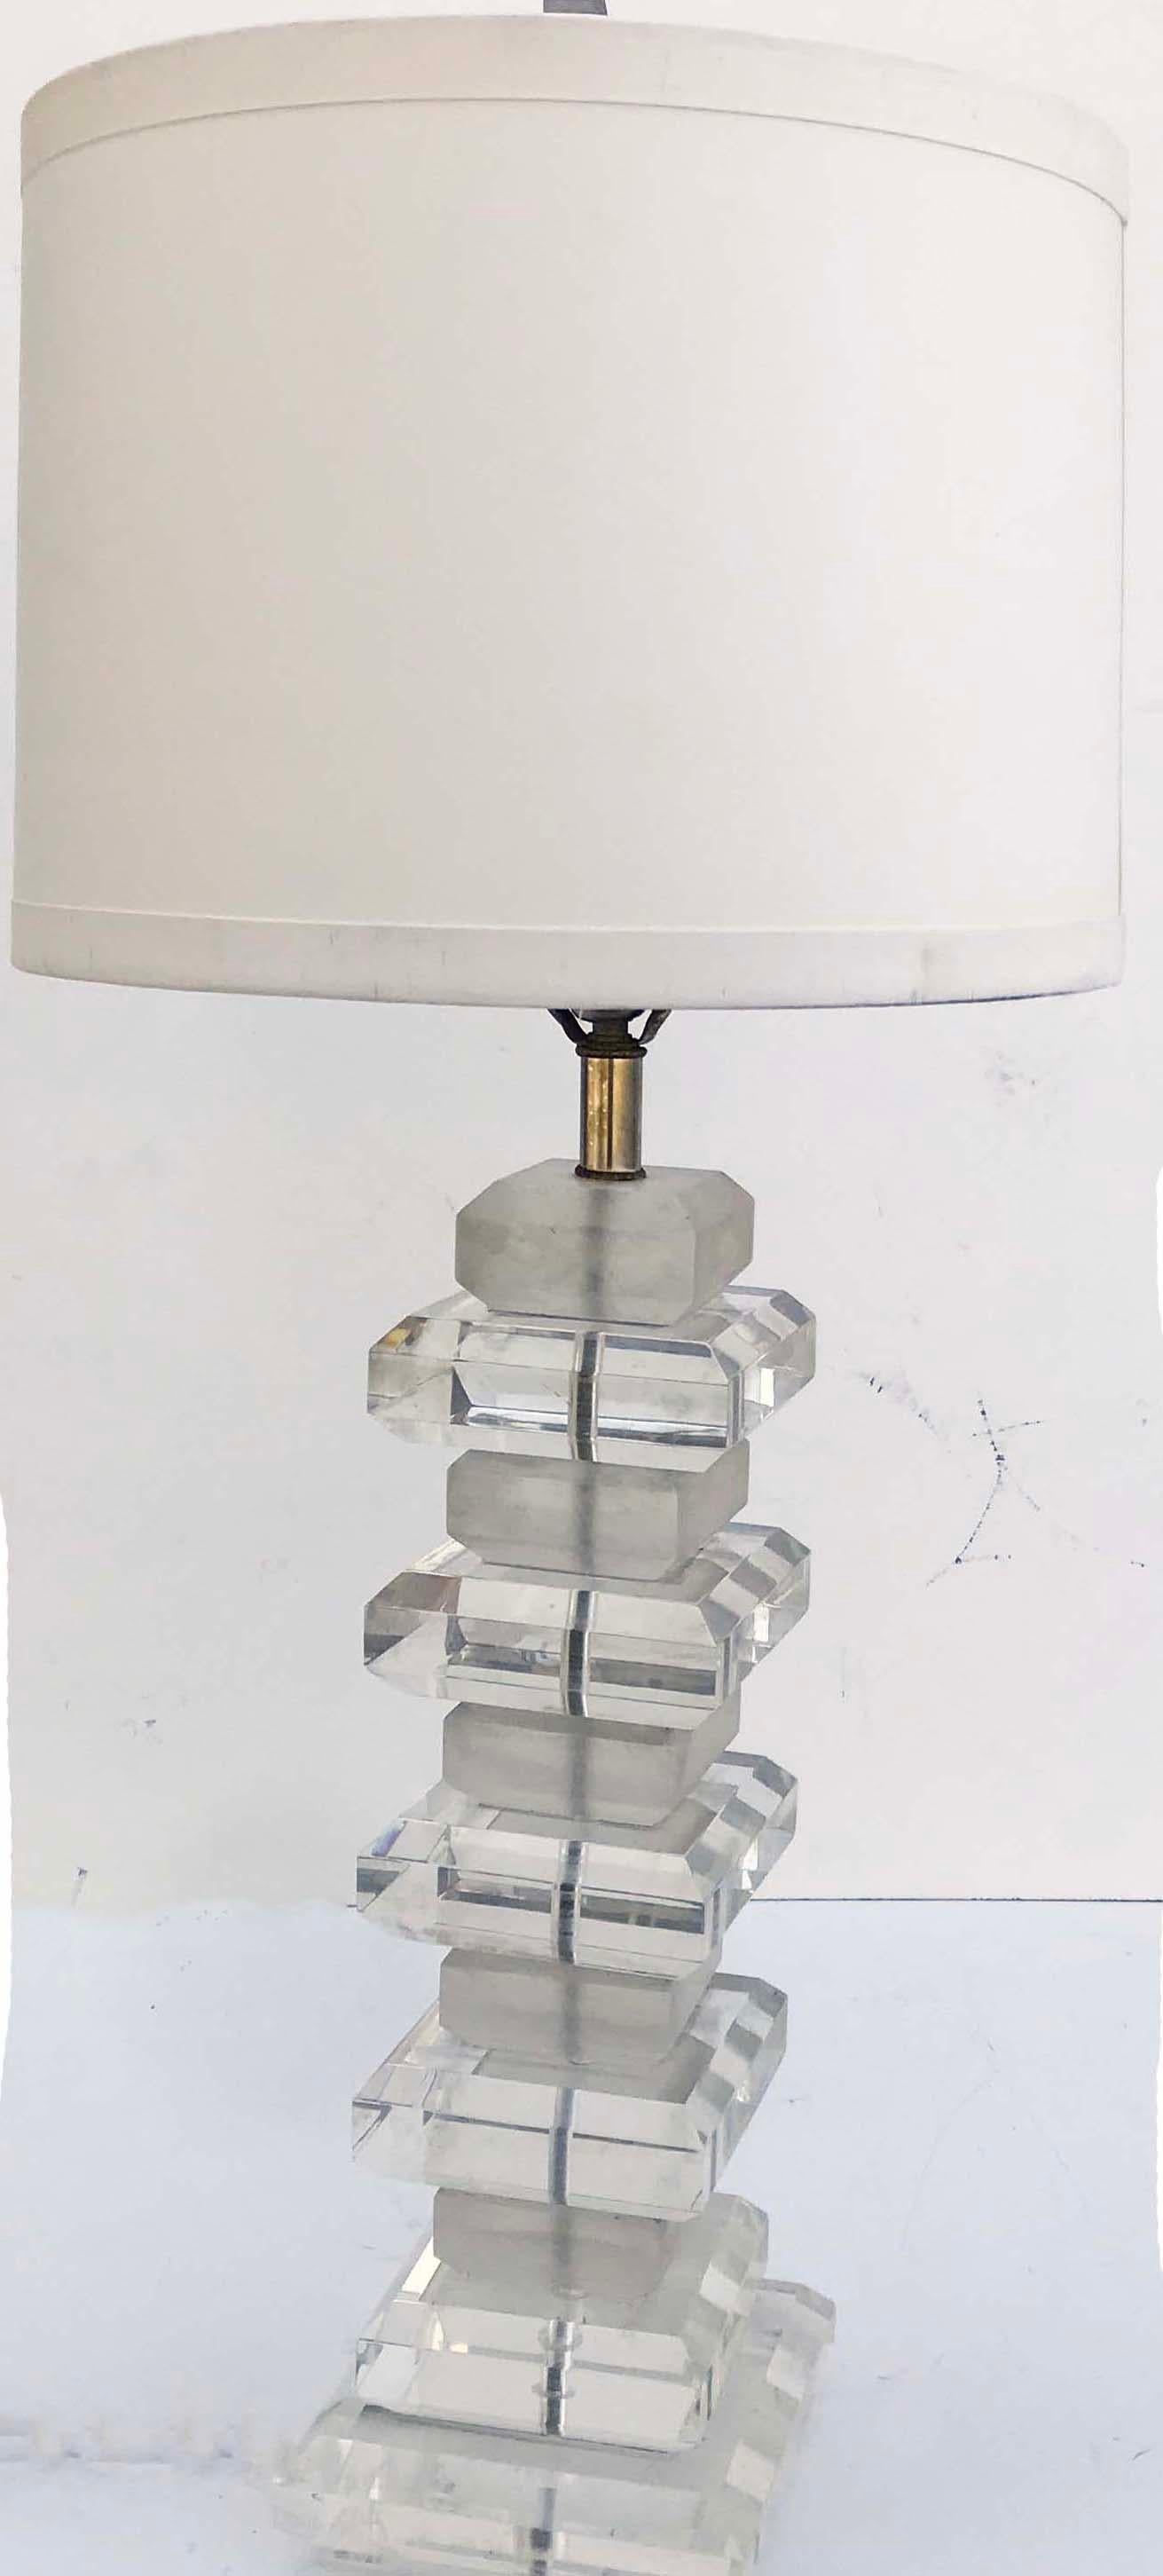 Superb and impressive large Karl Springer style Lucite table lamp 
Heavy and massive
Without finial and harp: 27